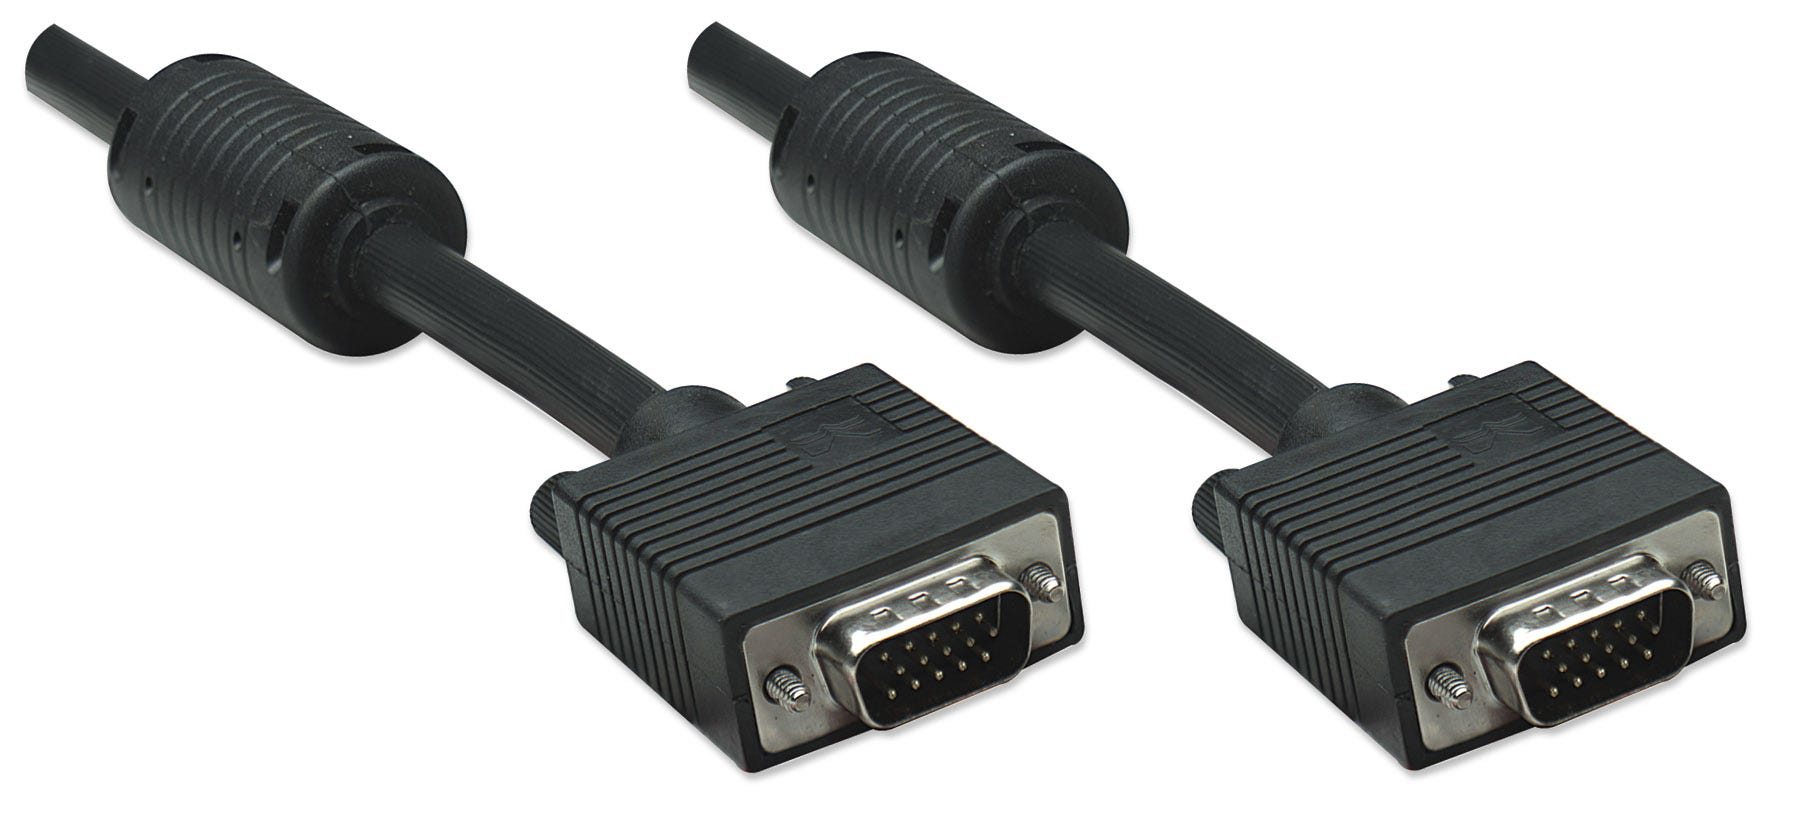 Manhattan VGA Monitor Cable (with Ferrite Cores), 10m, Black, Male to Male, HD15, Cable of higher SVGA Specification (fully compatible)